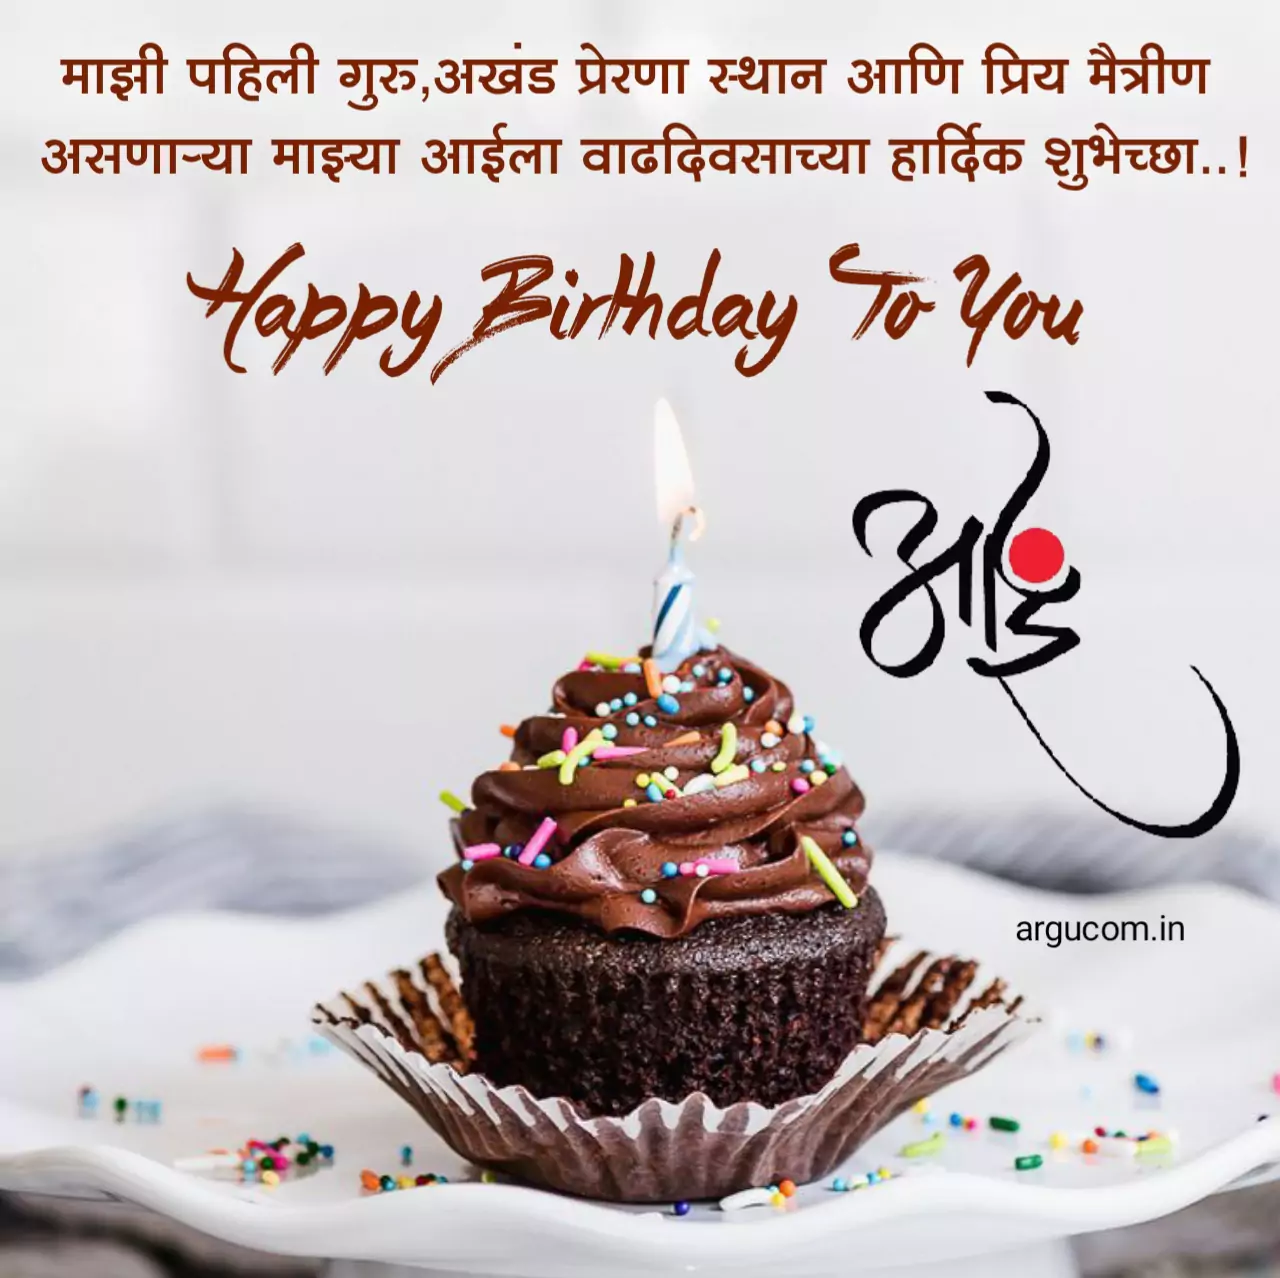 Birthday wishes for mother in marathi